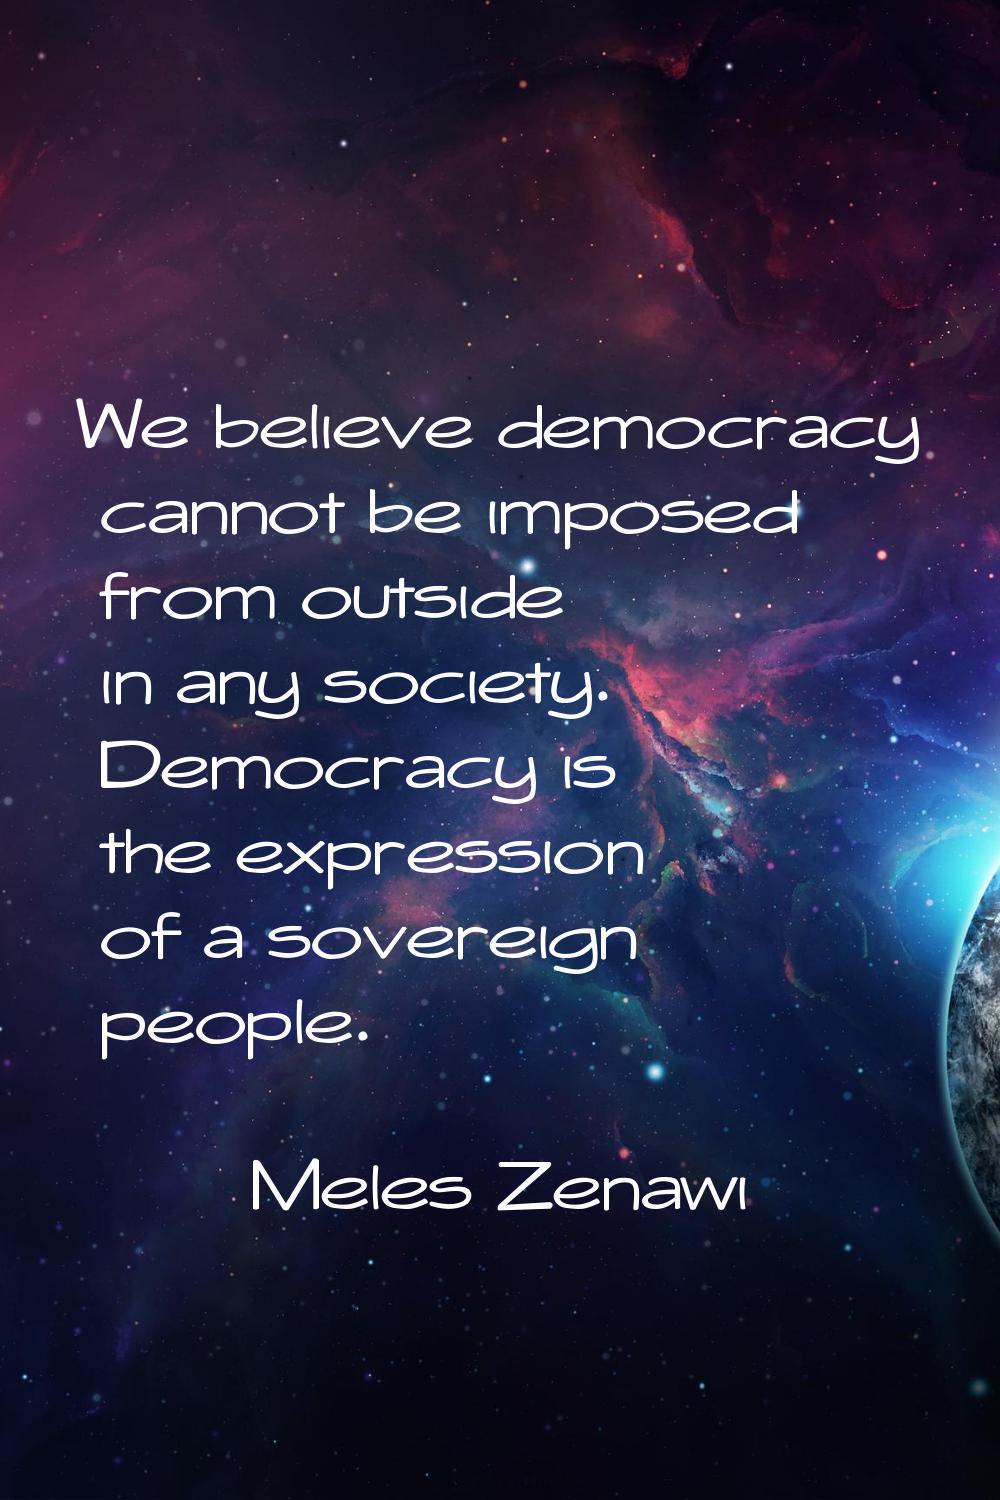 We believe democracy cannot be imposed from outside in any society. Democracy is the expression of 